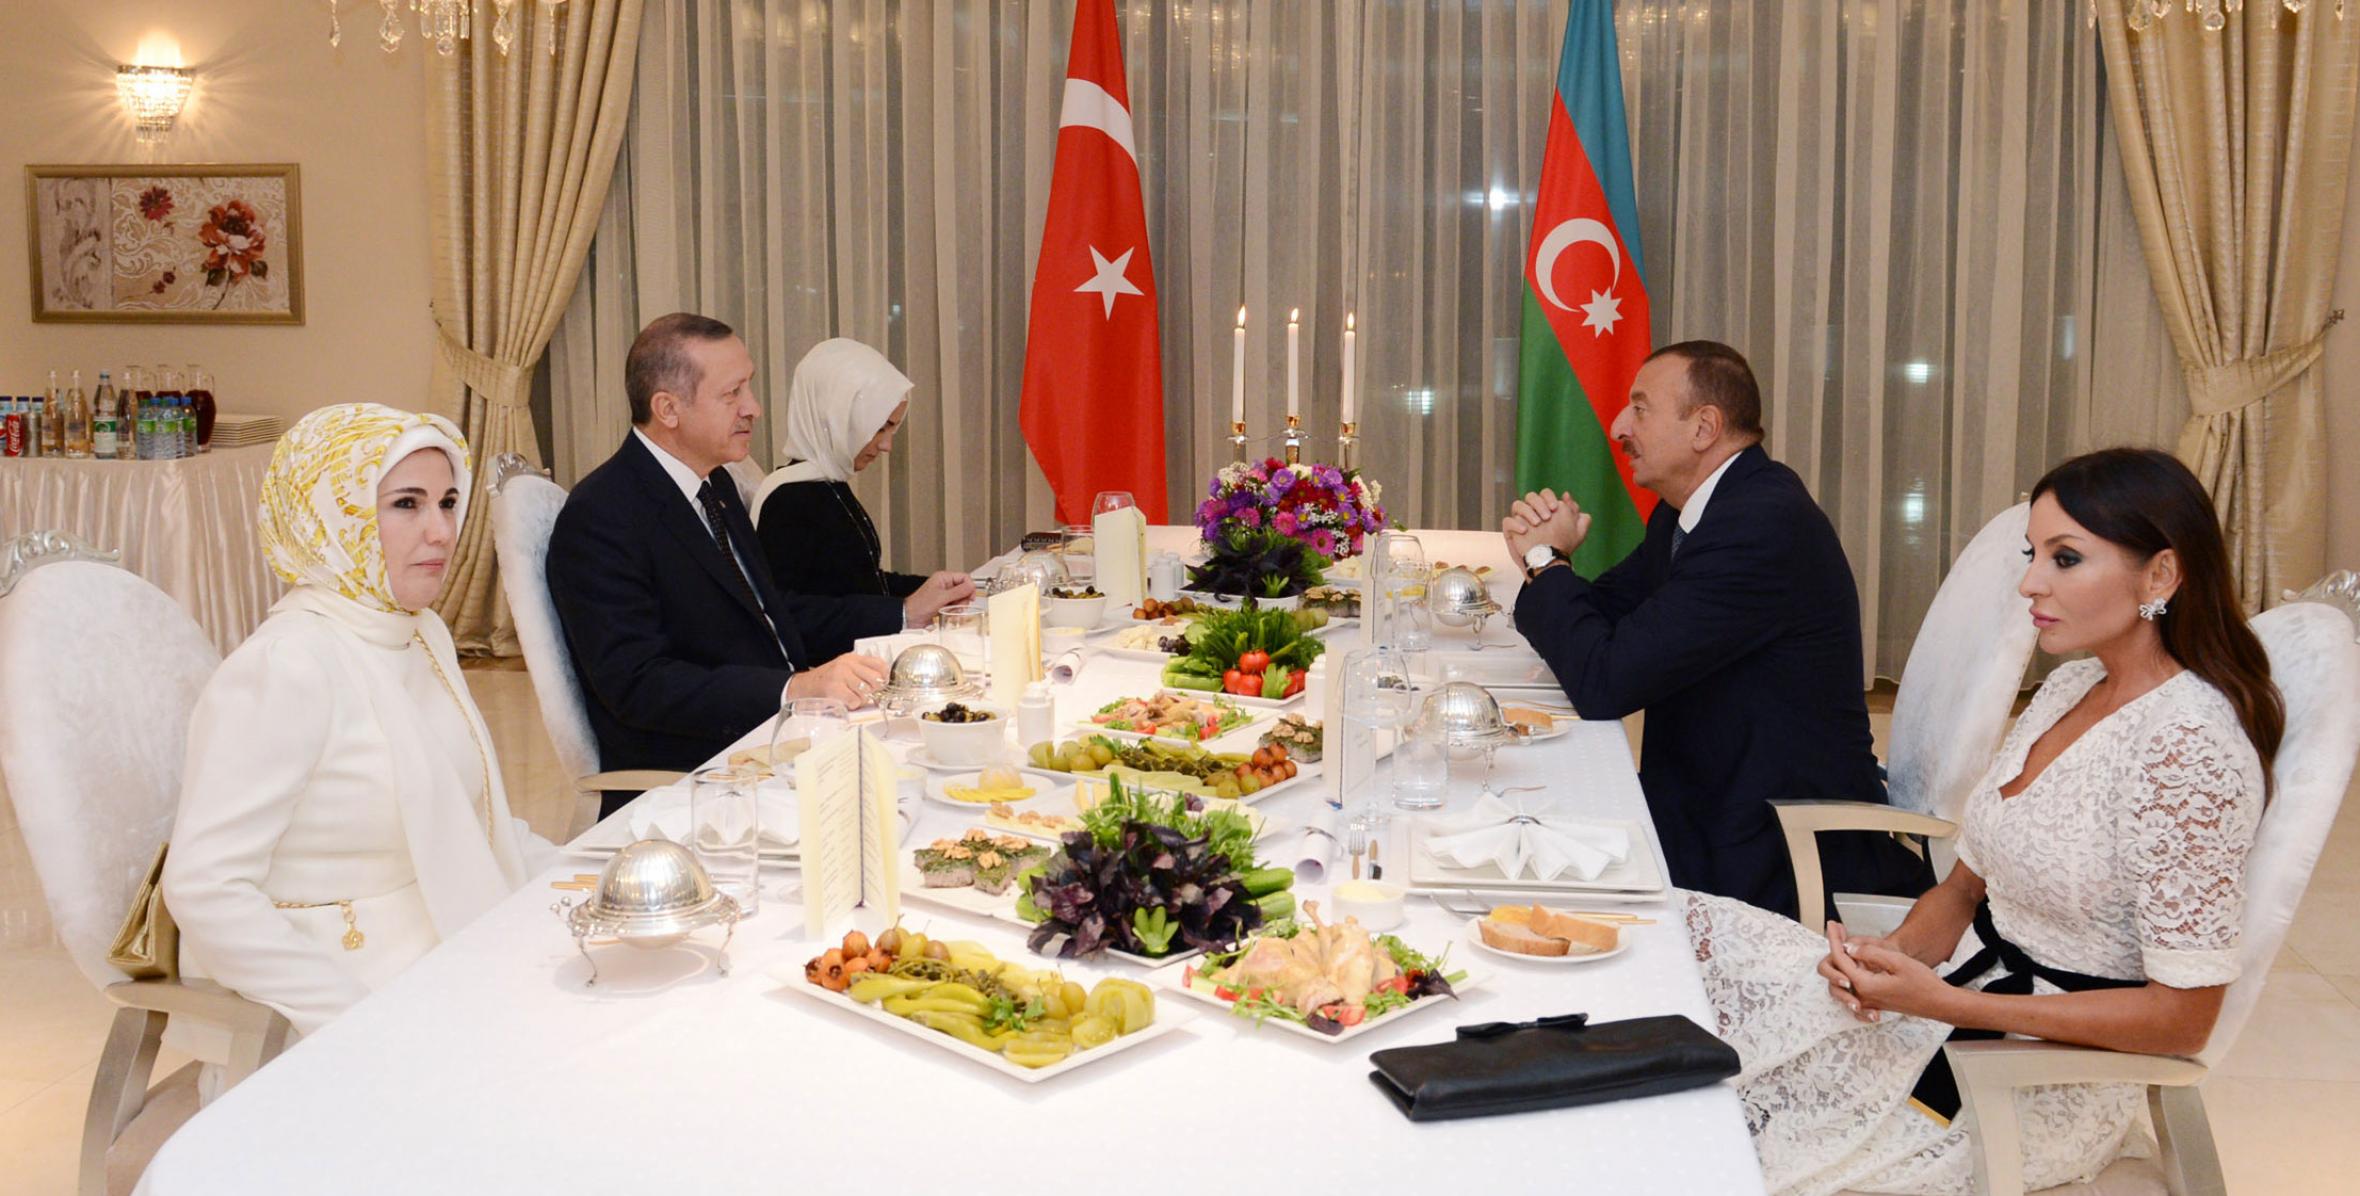 An official dinner reception has been hosted on behalf of Ilham Aliyev in honor of Prime Minister of Turkey Recep Tayyip Erdogan